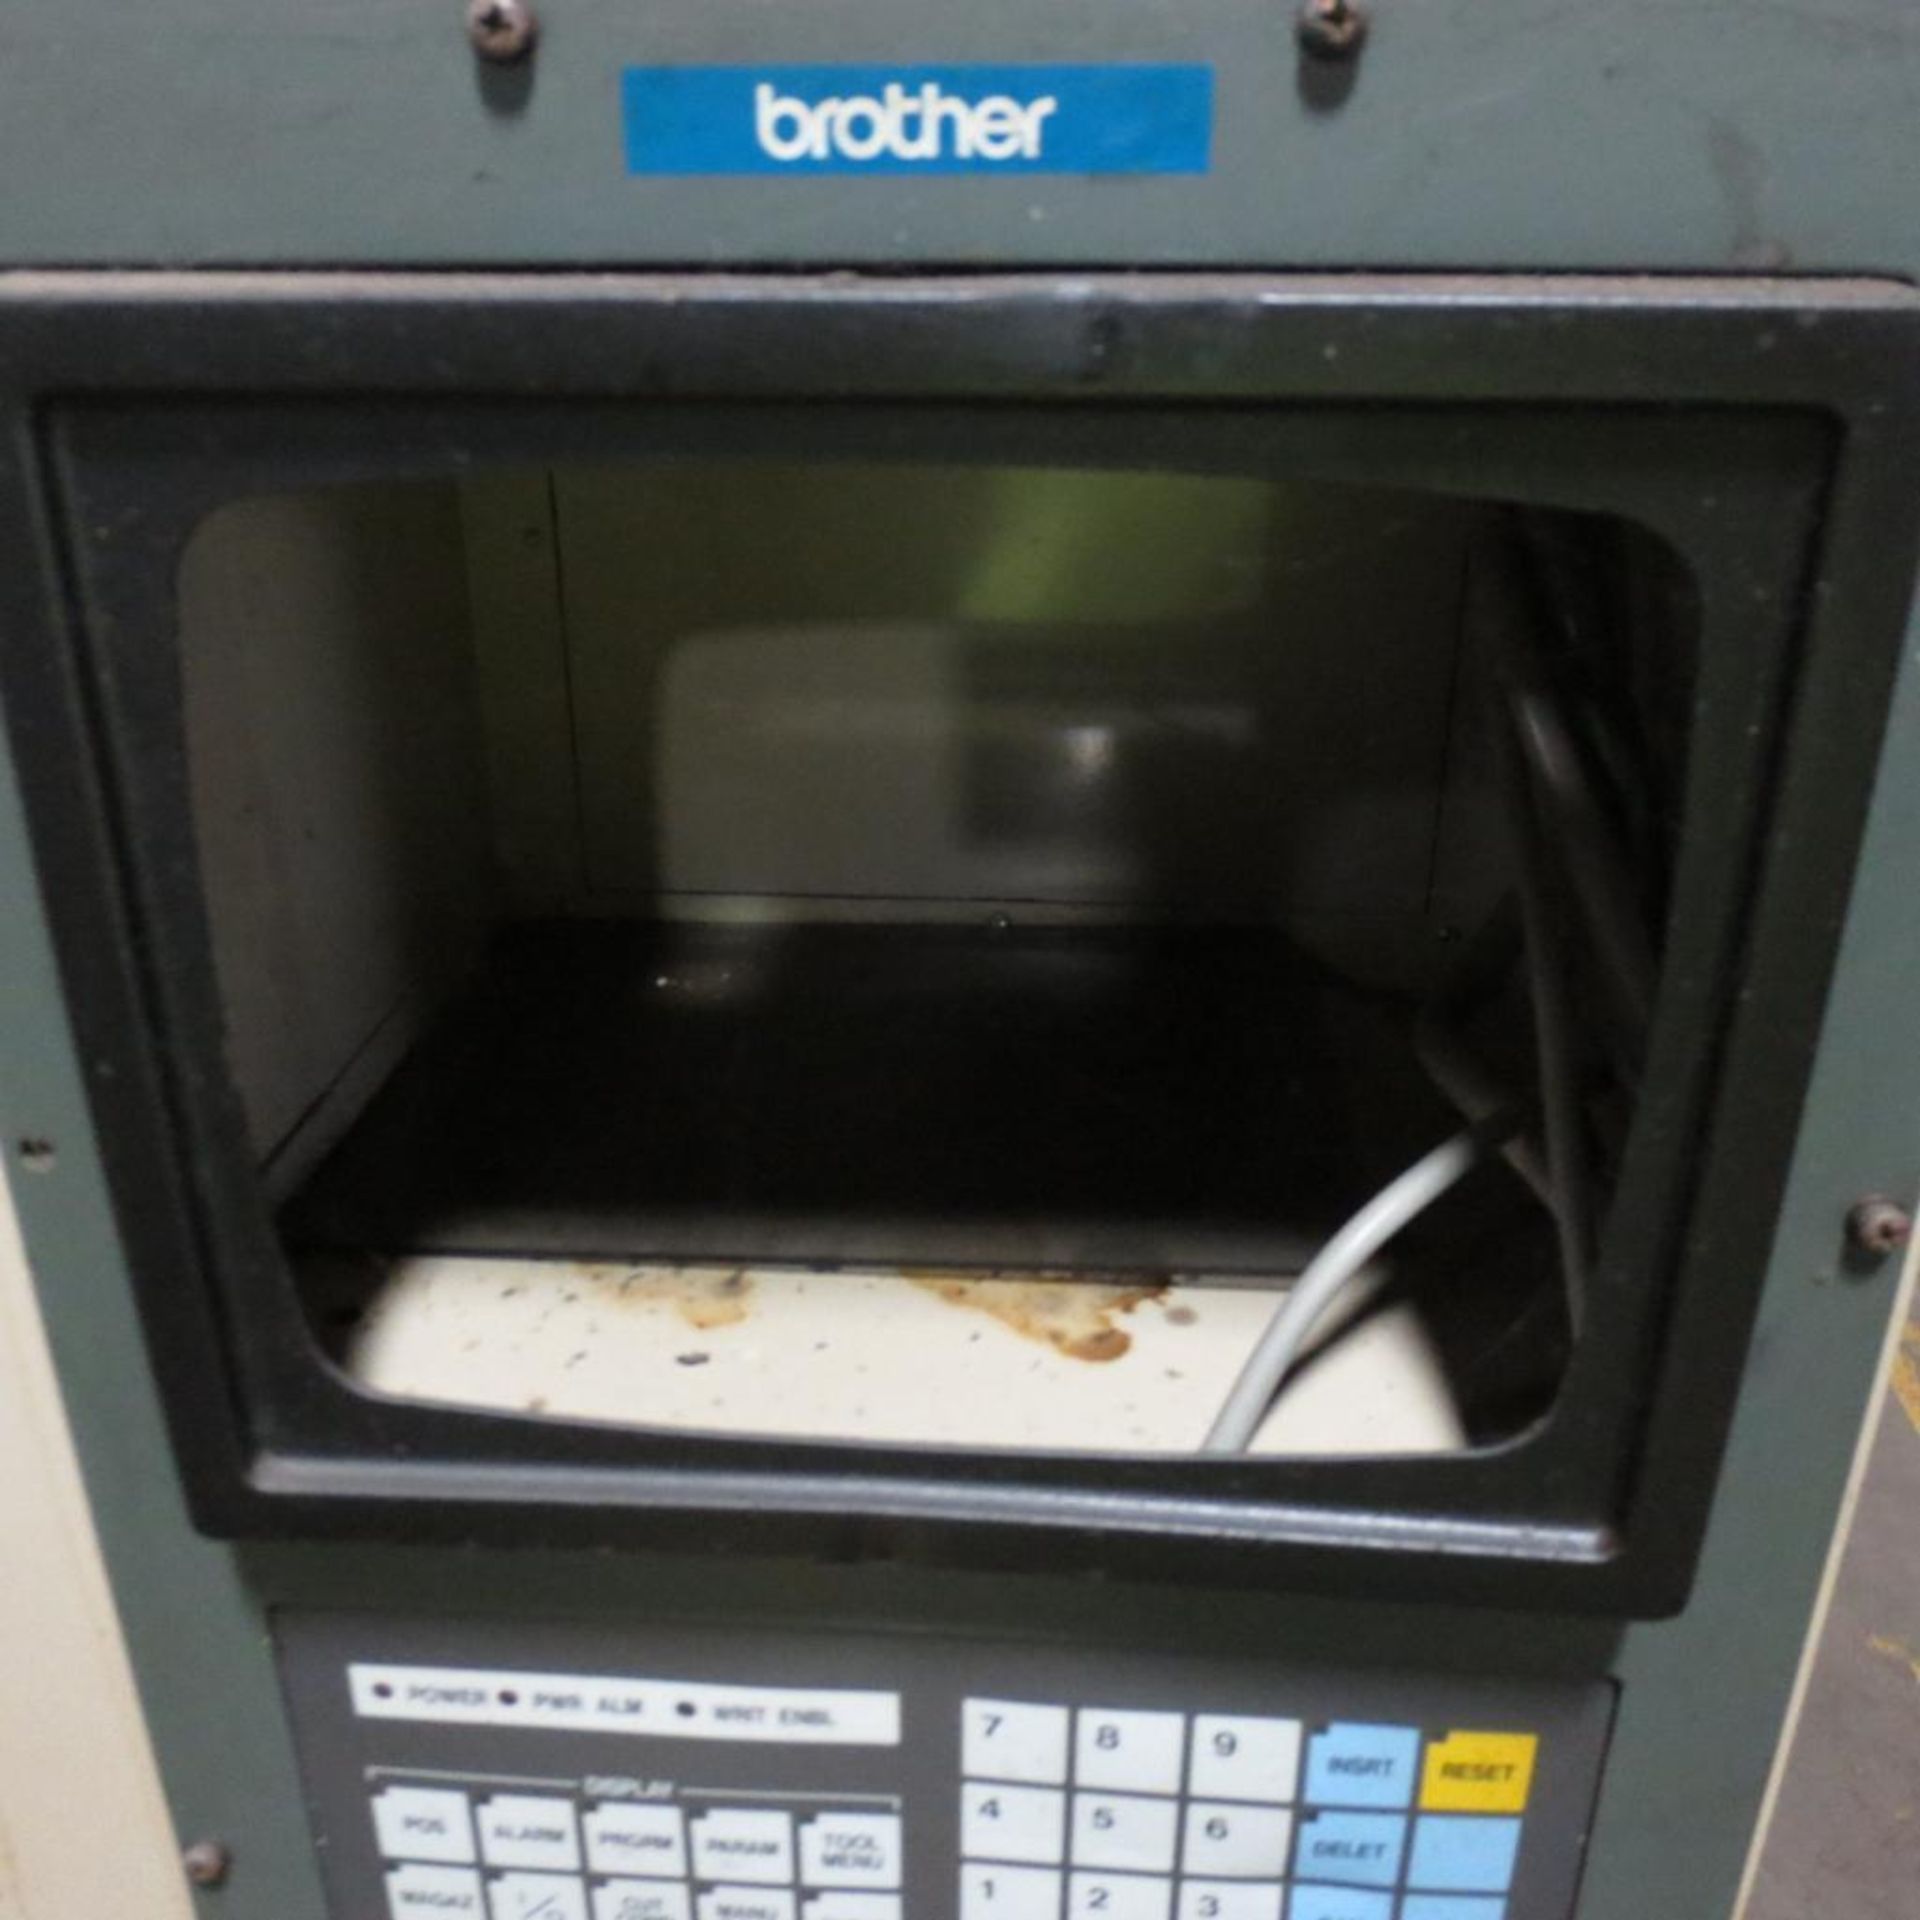 Brother TC-225 CNC Tapping Center. Loading Fee is $350.00 - Image 3 of 8